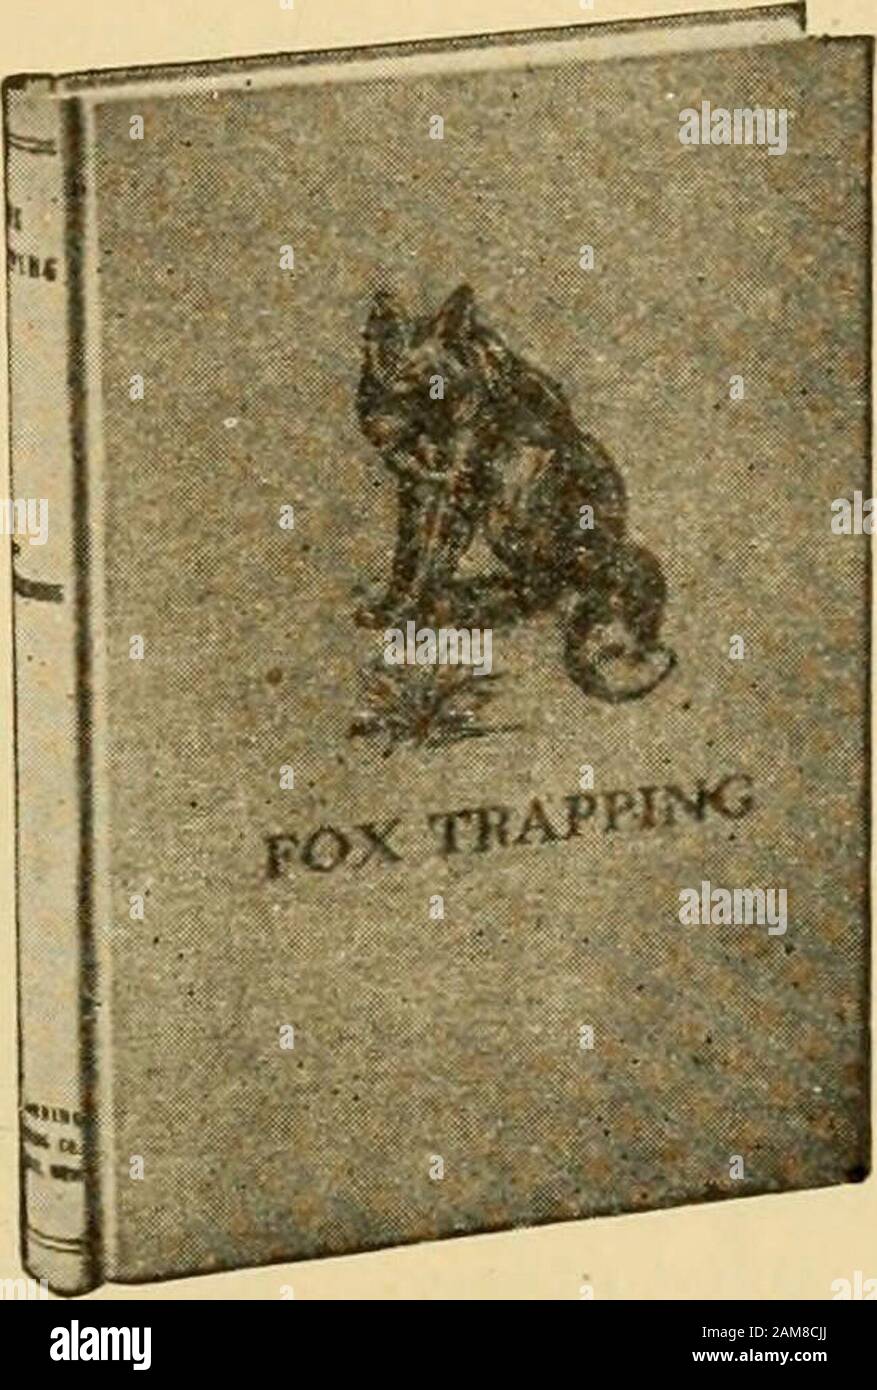 Gleanings in bee culture . pers. . .,yr^&lt; This book is edited byA. R. Harding, of theHunter - Trader - Trapper.contains about fifty illus-trations and nearly 200pages, and is divided intotwenty chapters as fol-lows: I. General Information. II. Mink and Their Habits. III. Size and Care of Skins. IV. Good and Lasting Baits.V. Bait and Scent. VI. Places to Set. VII. Indian Methods. VIII. Mink Trapping on the Prairies. IX. Southern Methods. X. Northern Methods. XI. Unusual Ways. ? XII. Illinois Trappers Methods. XIII. Experienced Trappers Ways. XIV. Many Good Methods.XV. Salt Sets. XVI. Log an Stock Photo